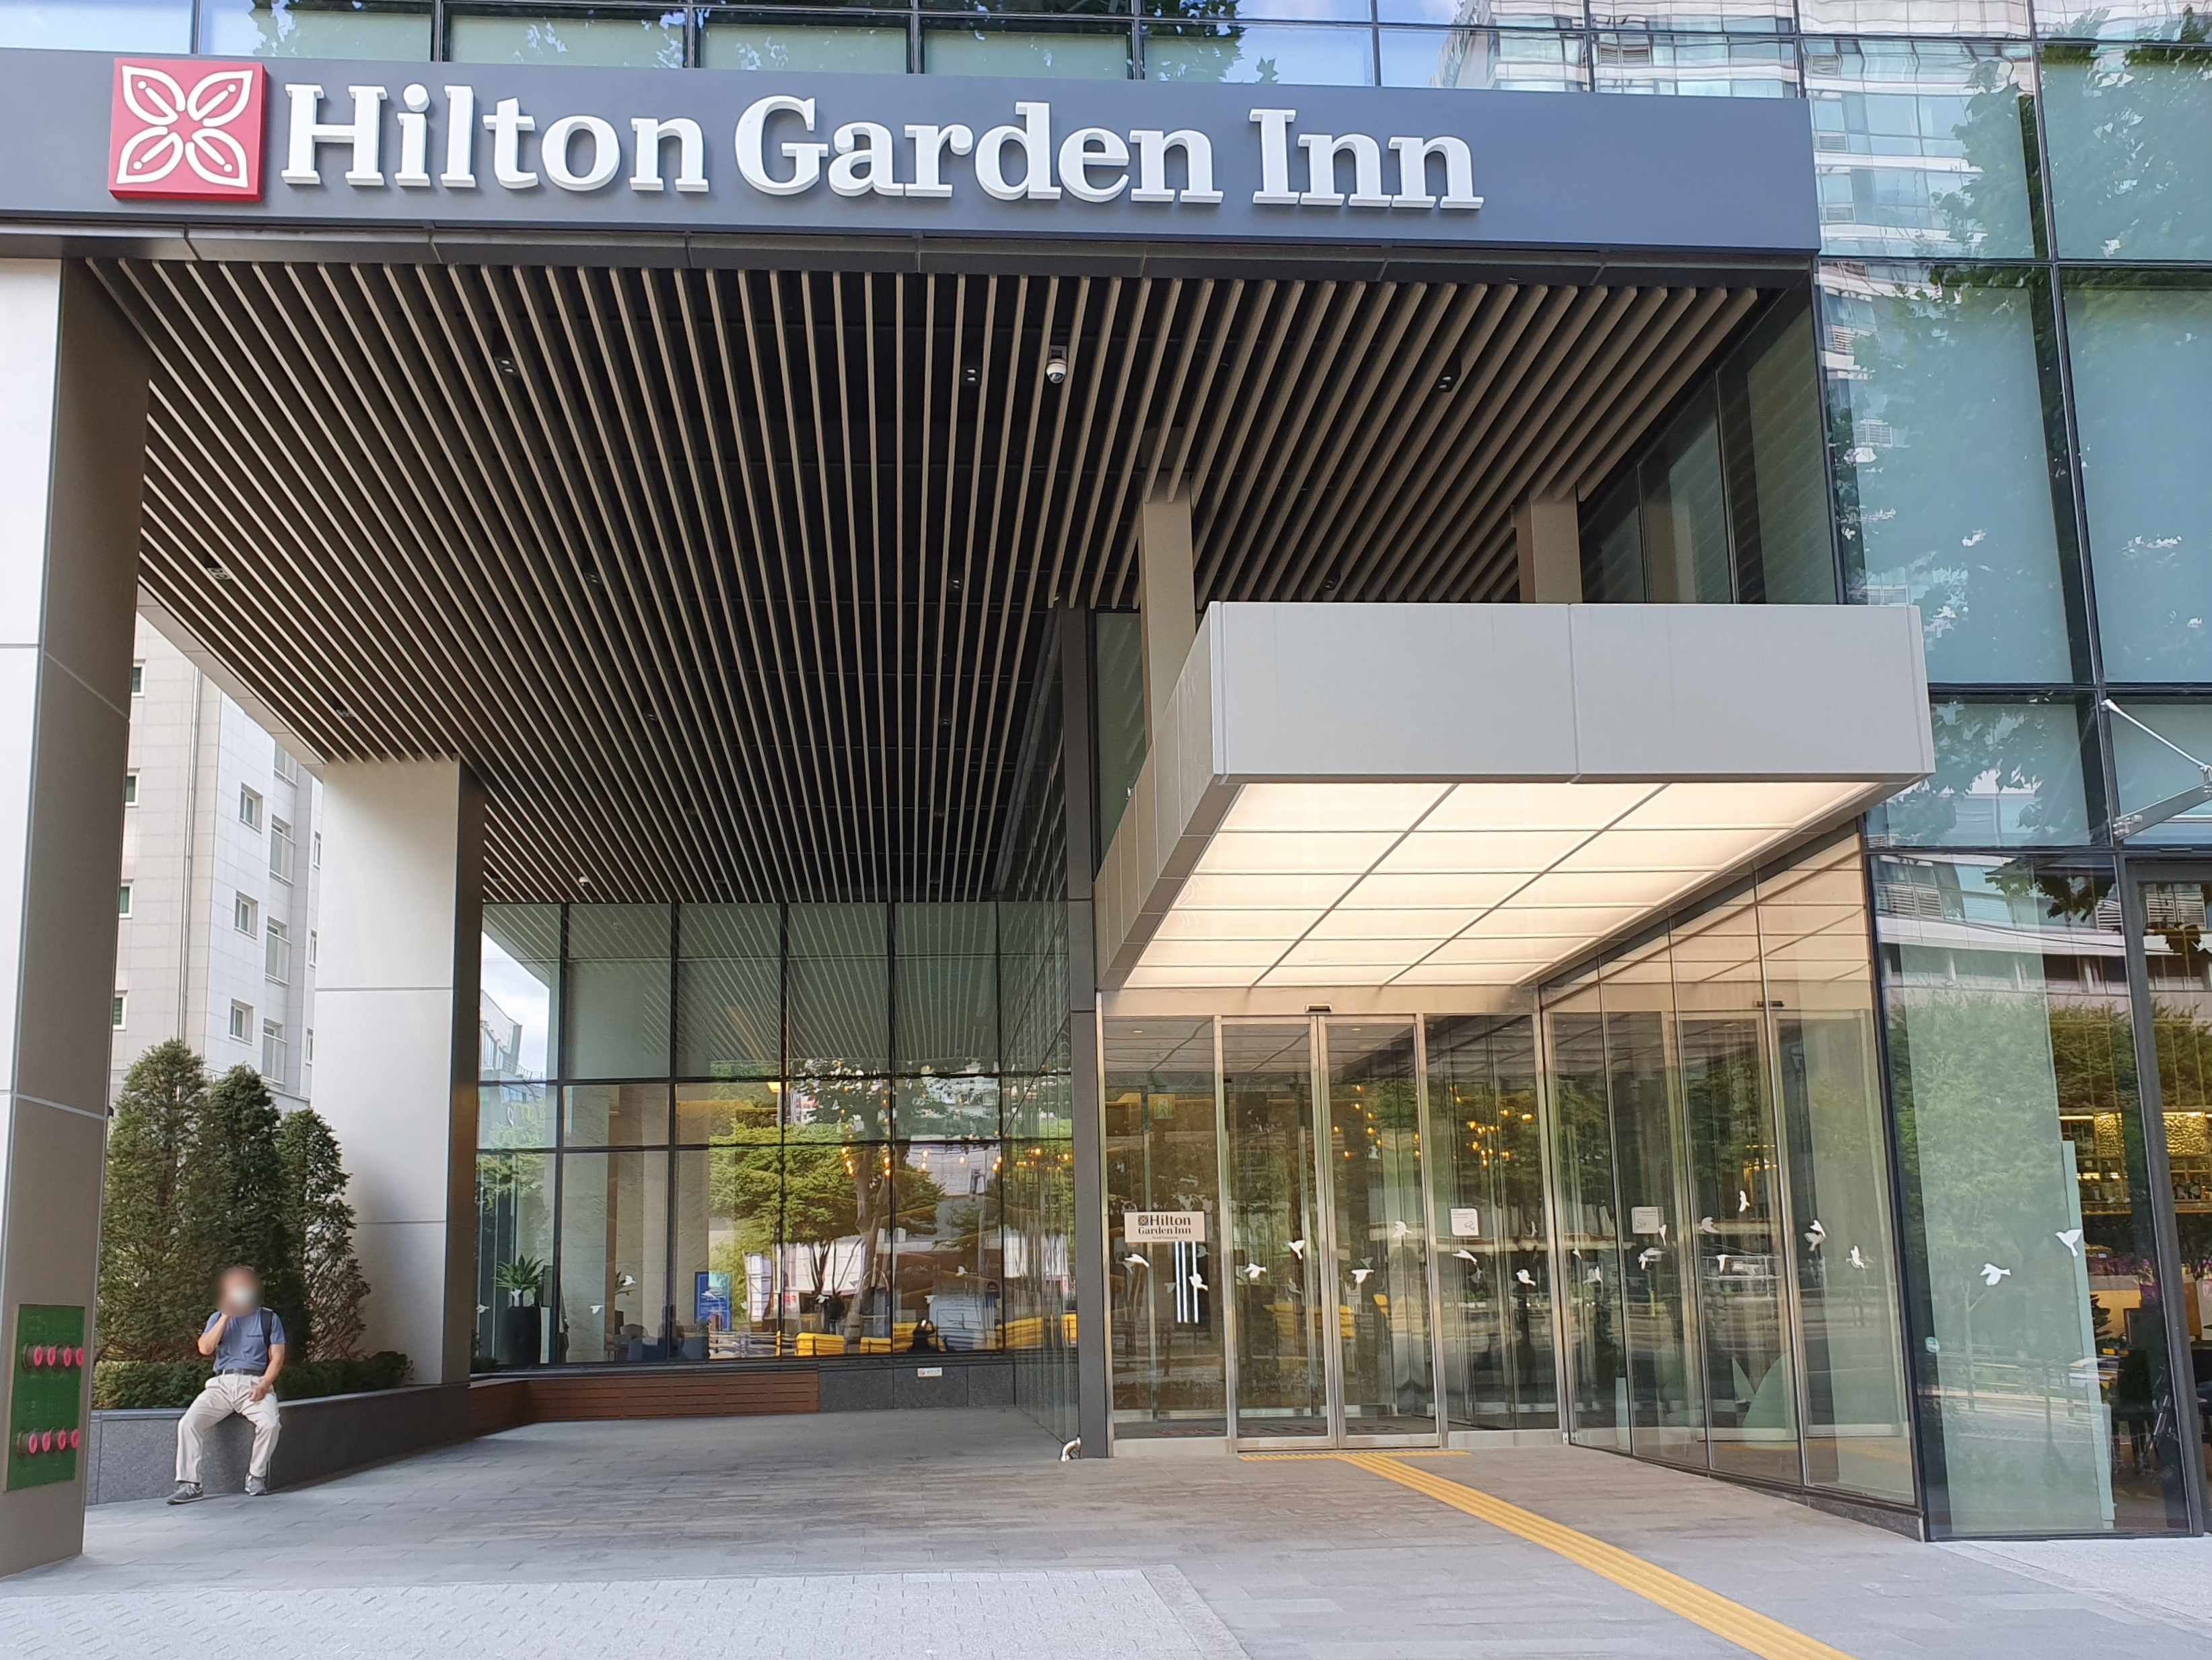 Hilton Garden Inn Seoul Gangnam	1 : Hotel main entrance with significantly wide access road